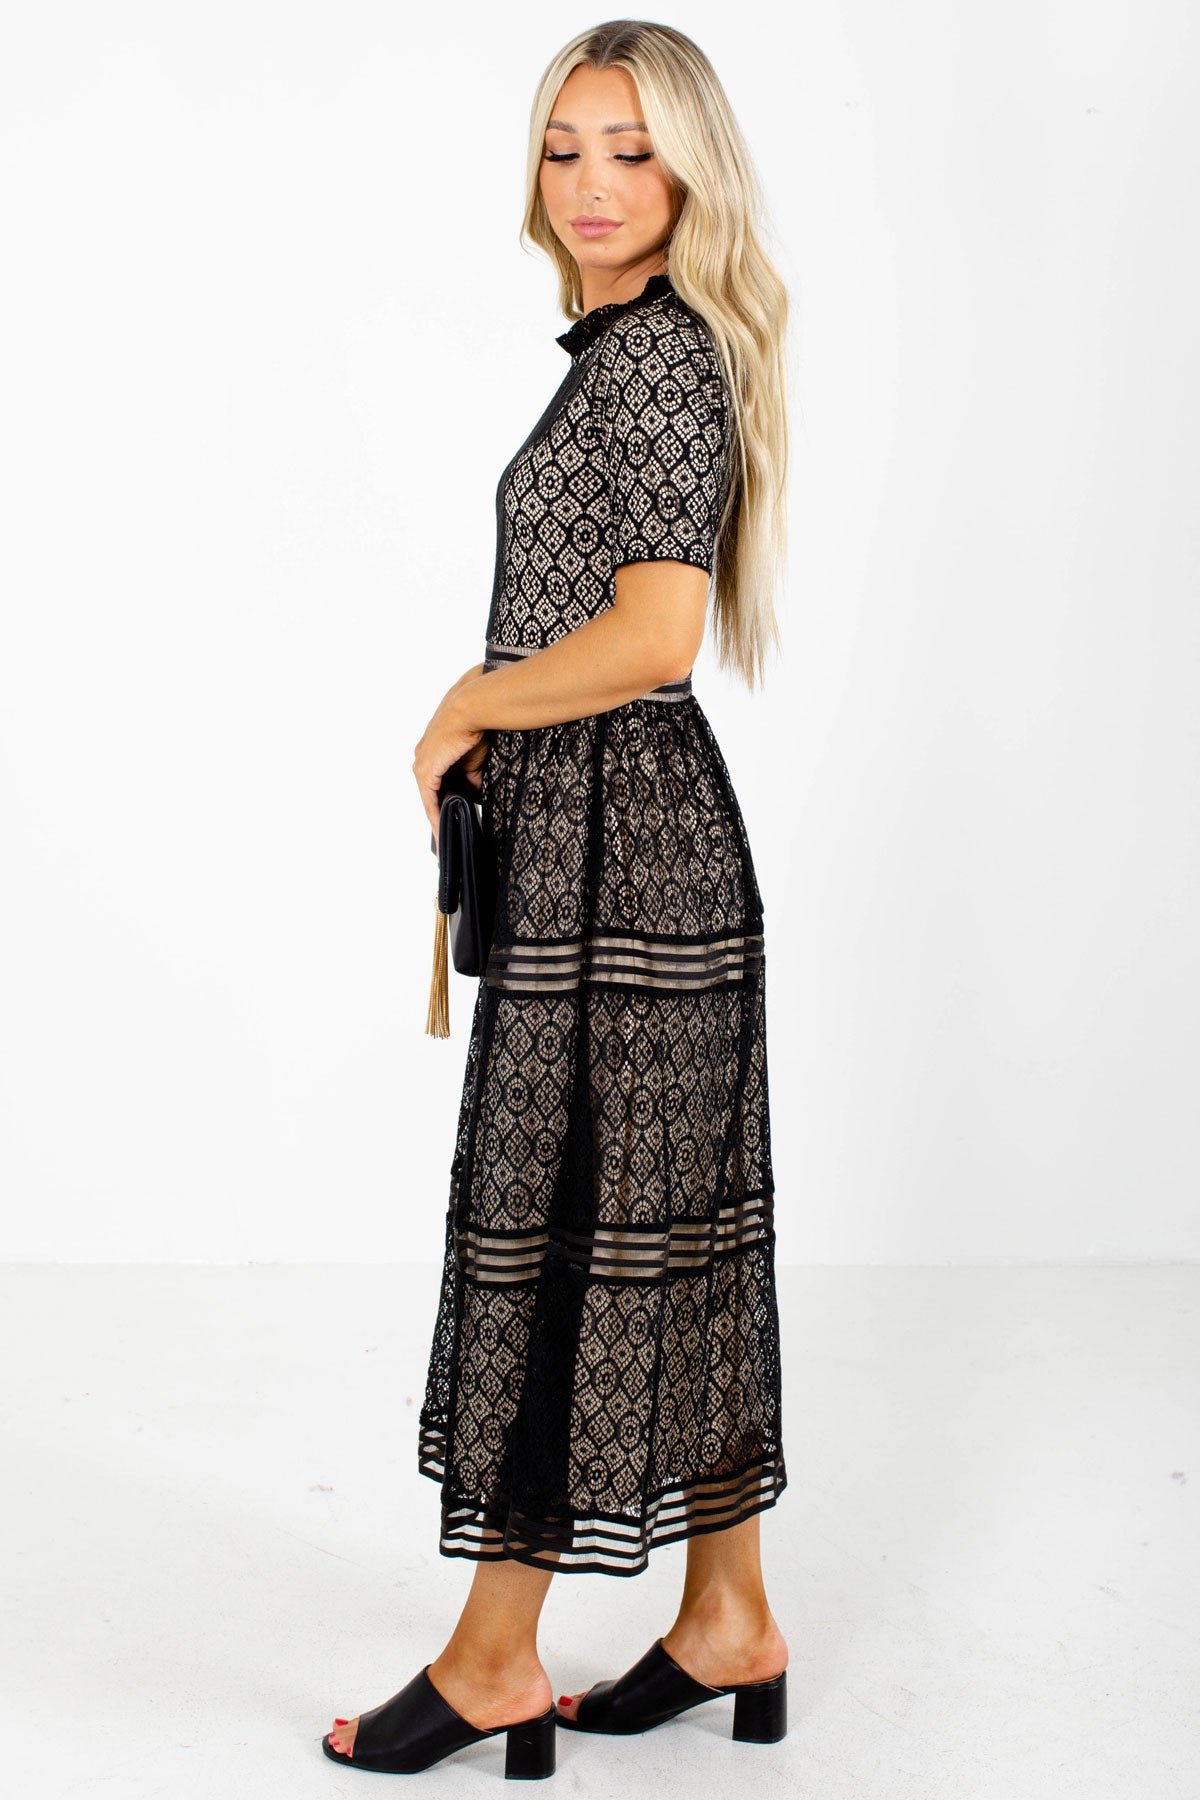 Black Midi Dress with Line Accents in Skirt.